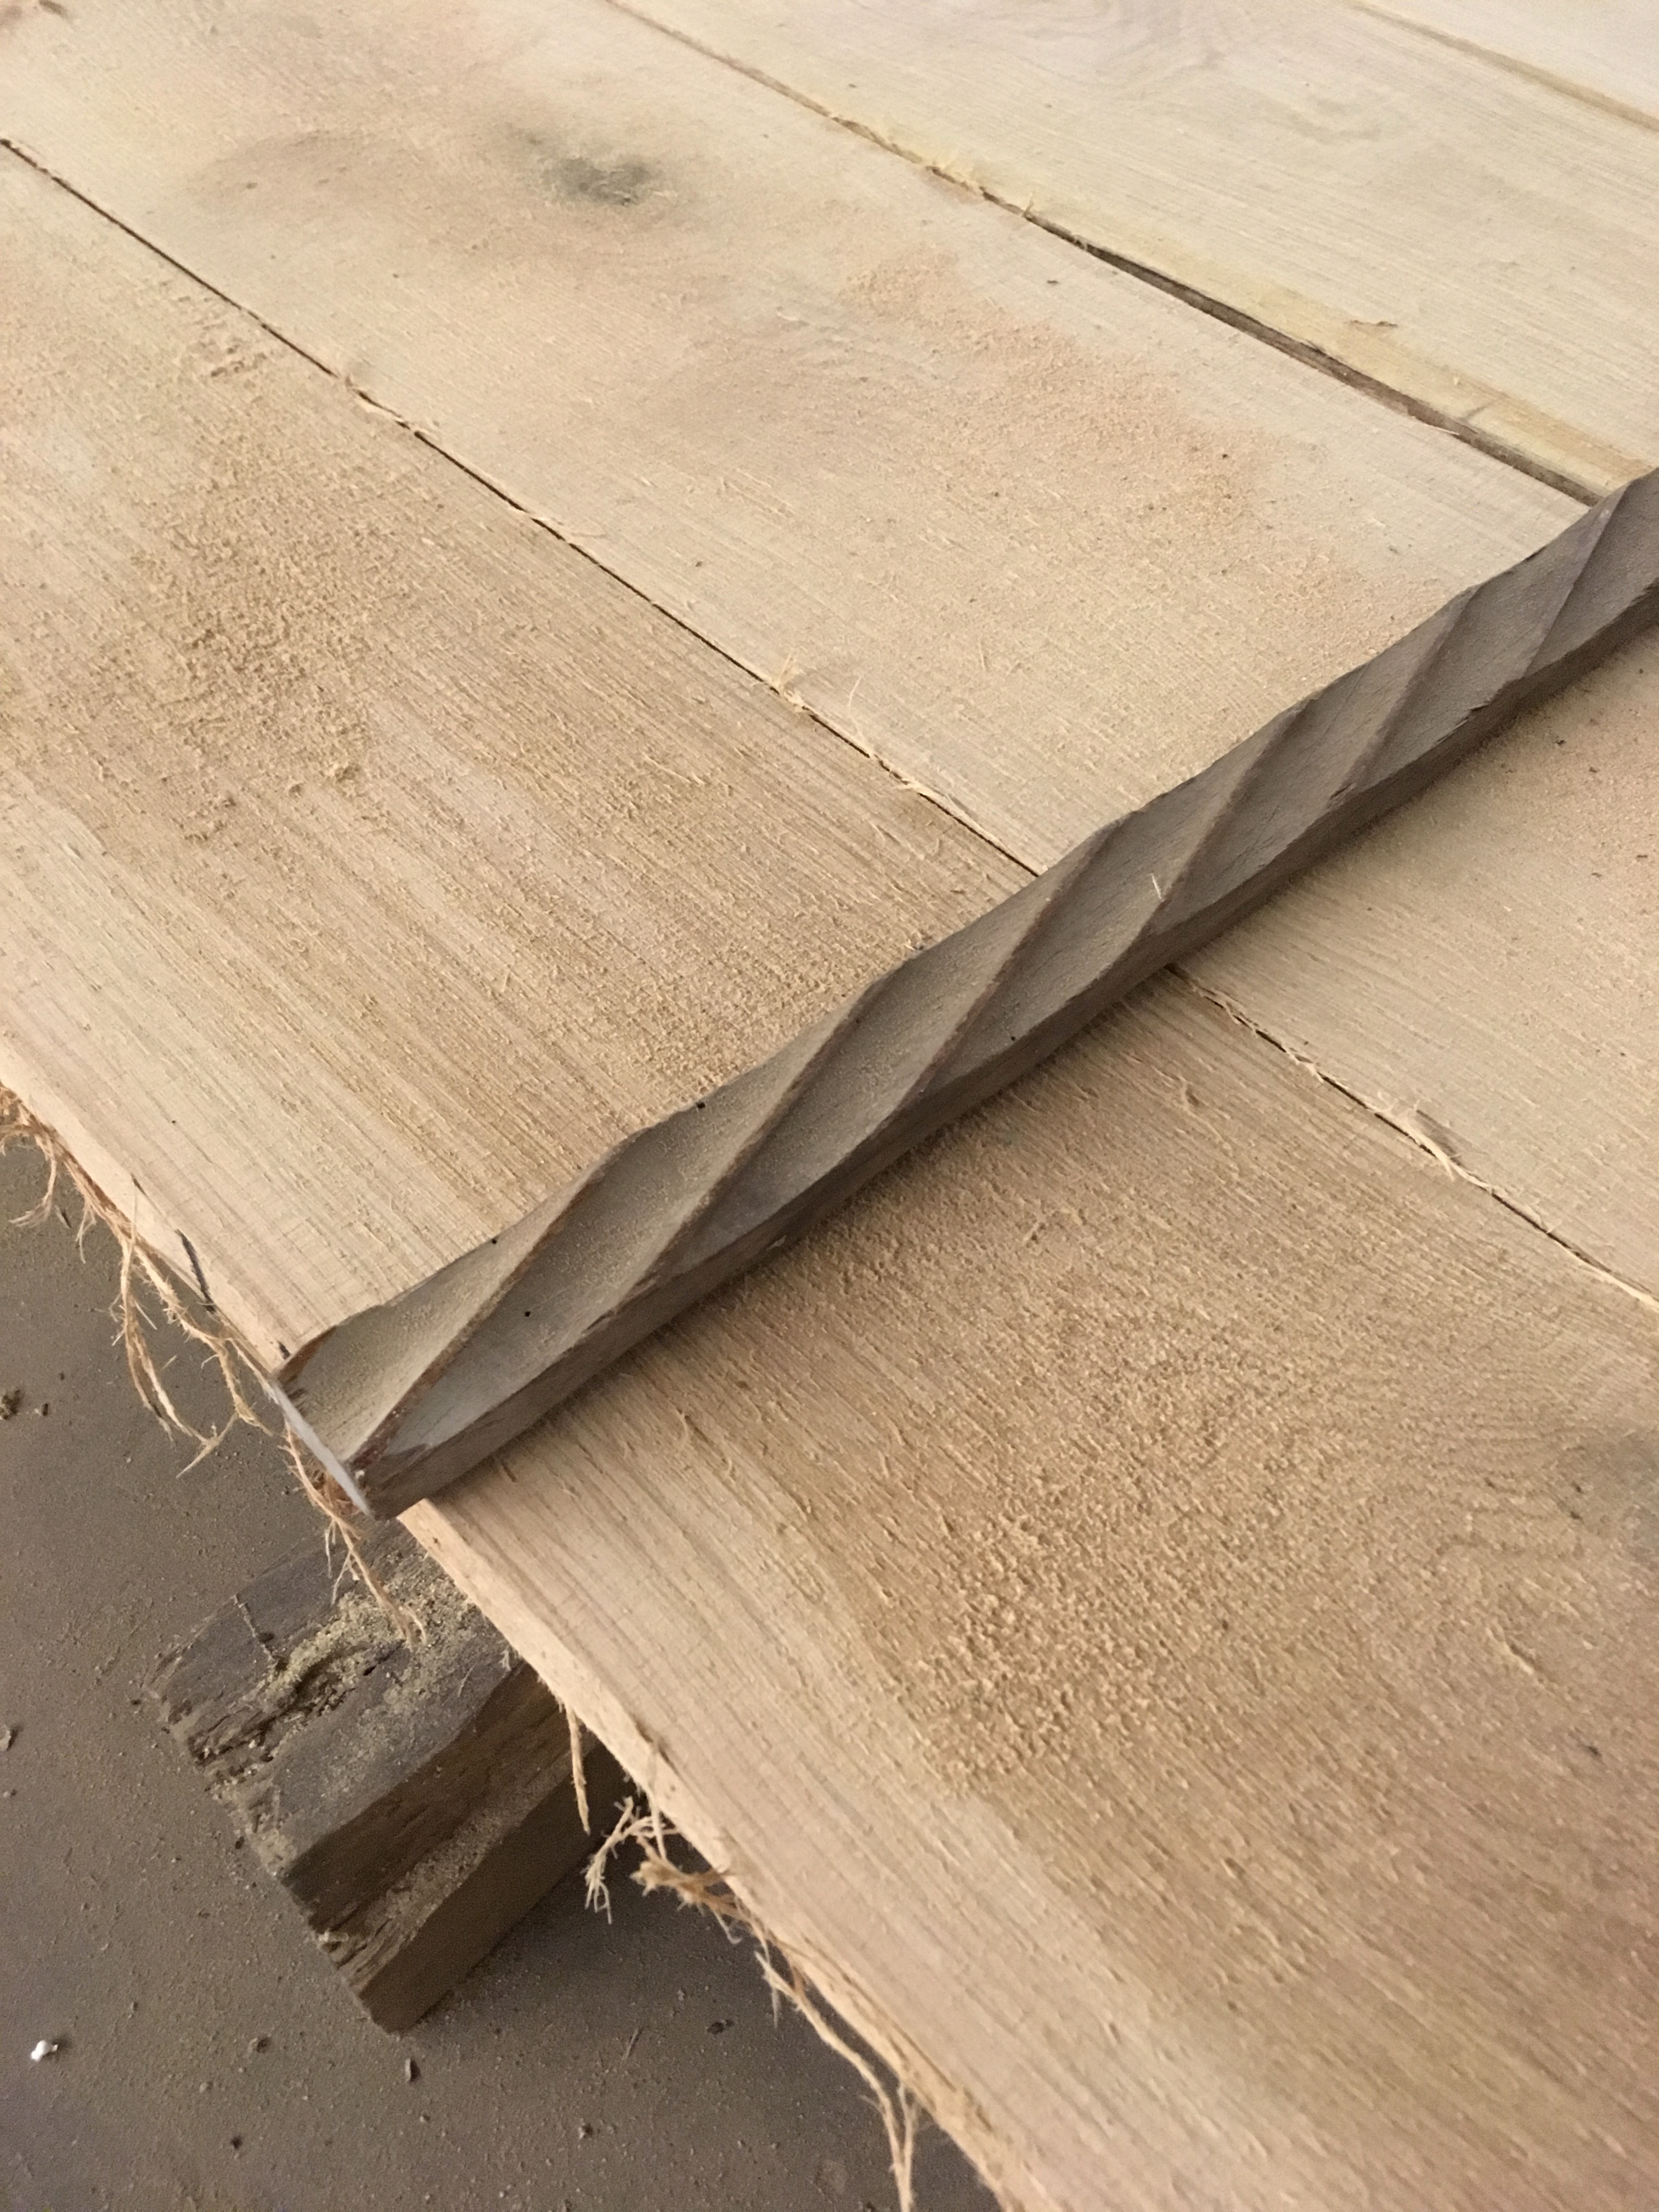 How to stop end checking in lumber | Woodworking Network